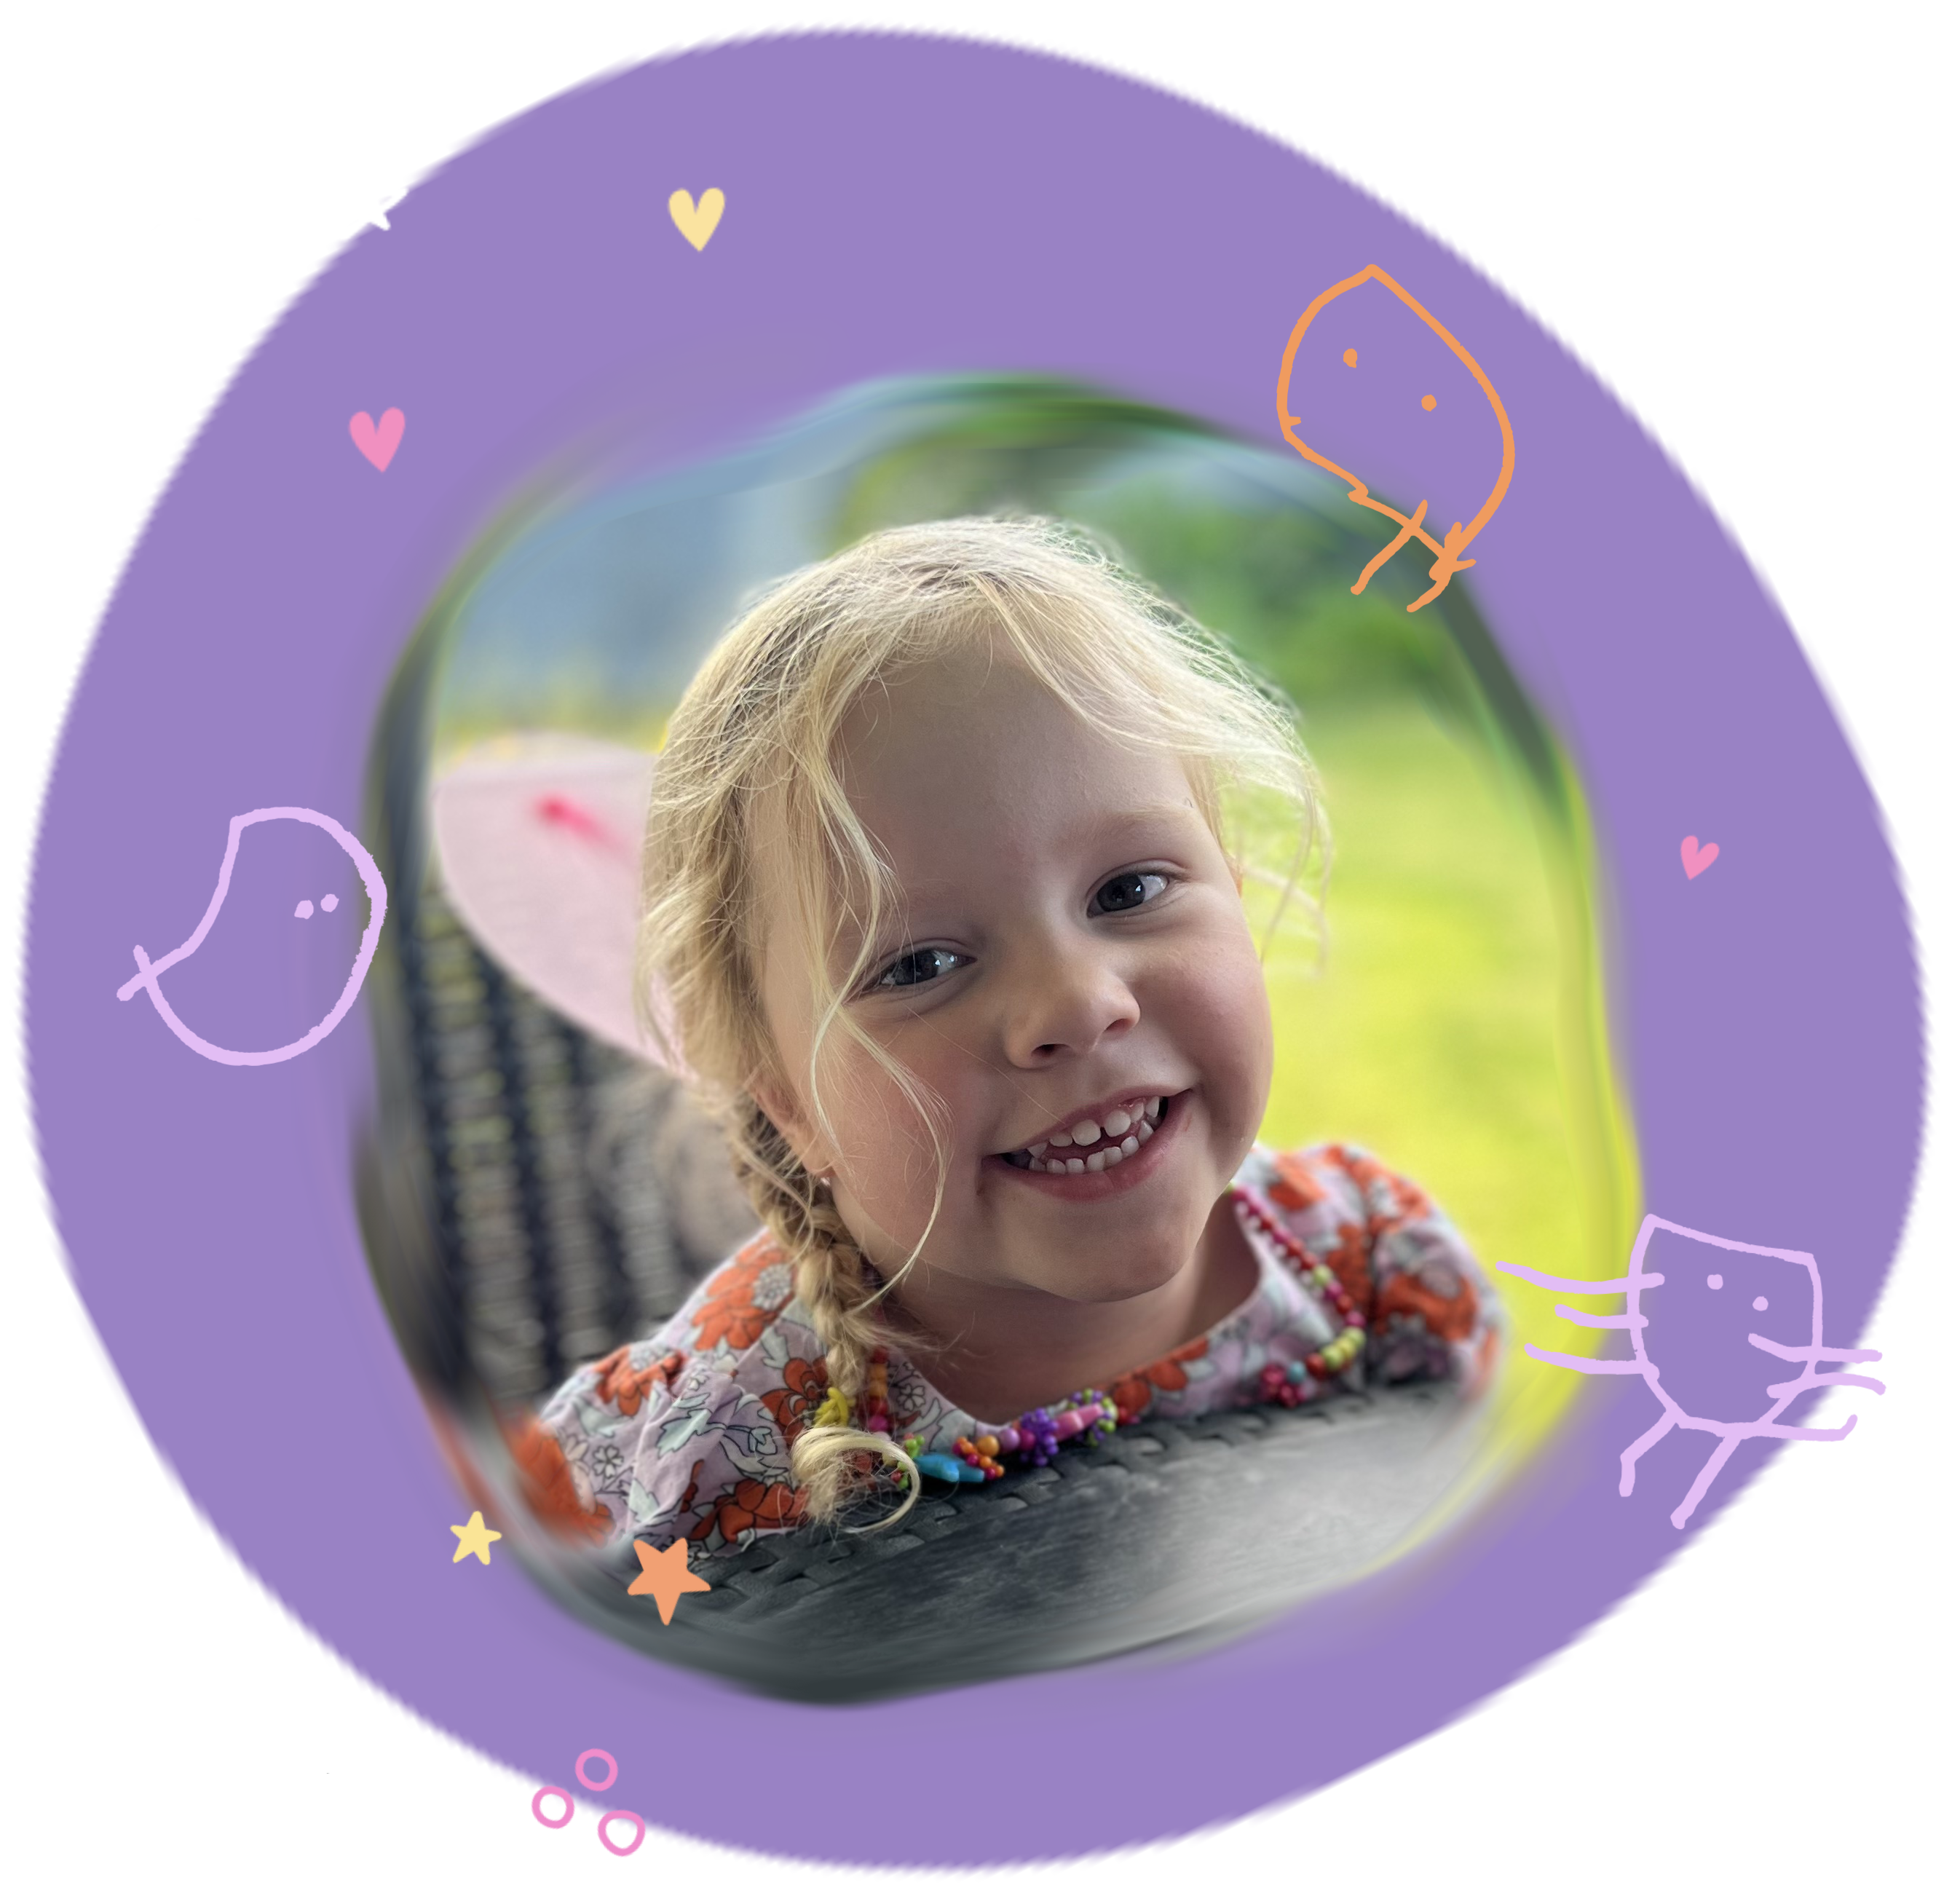 3 year old Effie Hurley from Dear Effie, the grief support charity, looking at the camera and smiling. She is surrounded by a purple circle background and her colourful doodle art of stick figure people that she had drawn herself as well as colourful love hearts and stars.